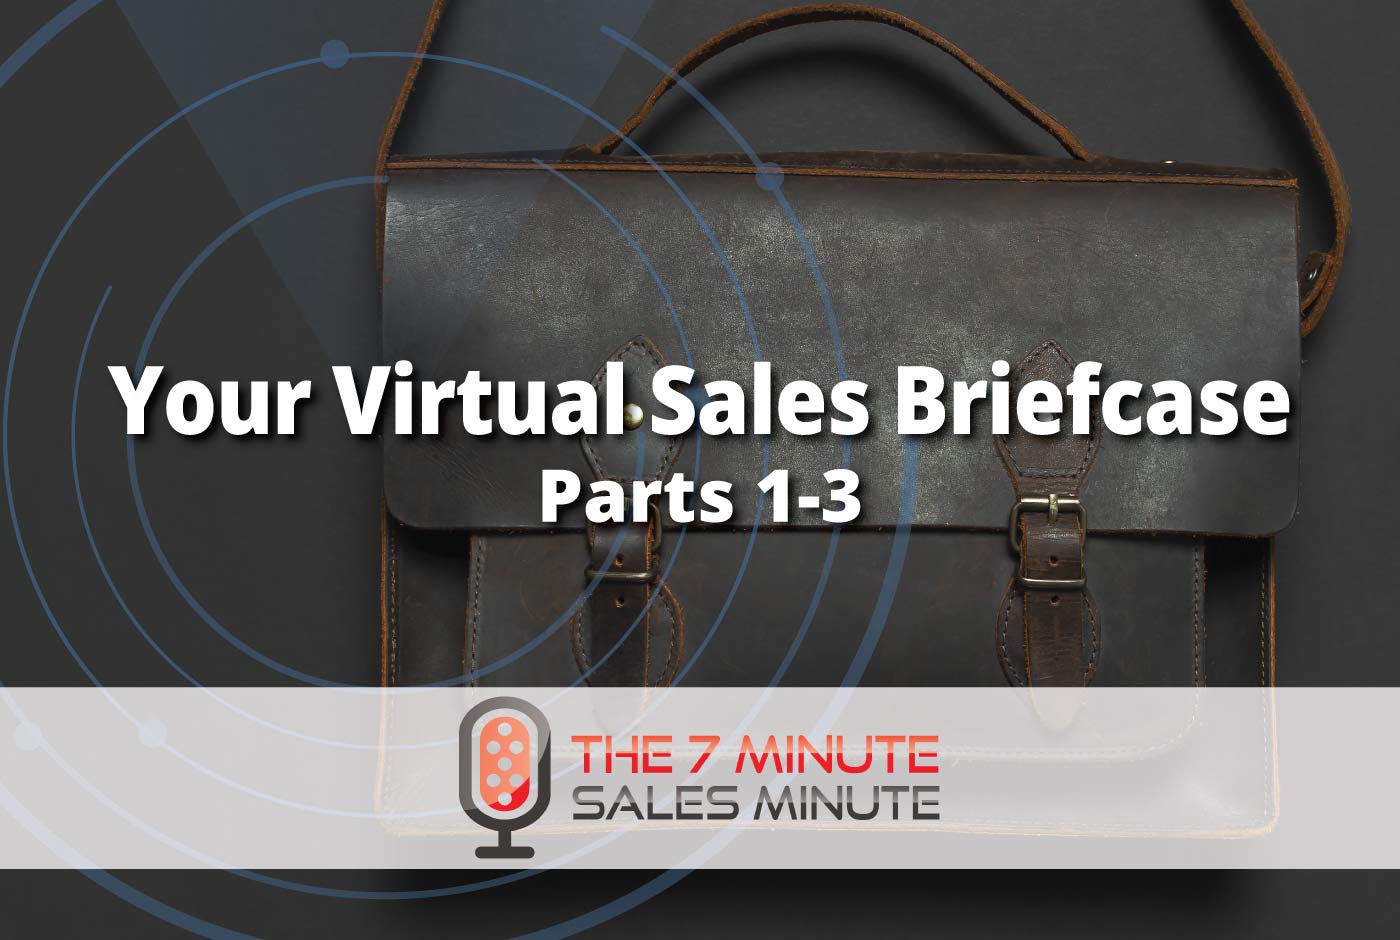 7 Minute Sales Minute Podcast - Your Virtual Sales Briefcase  - Parts 1-3